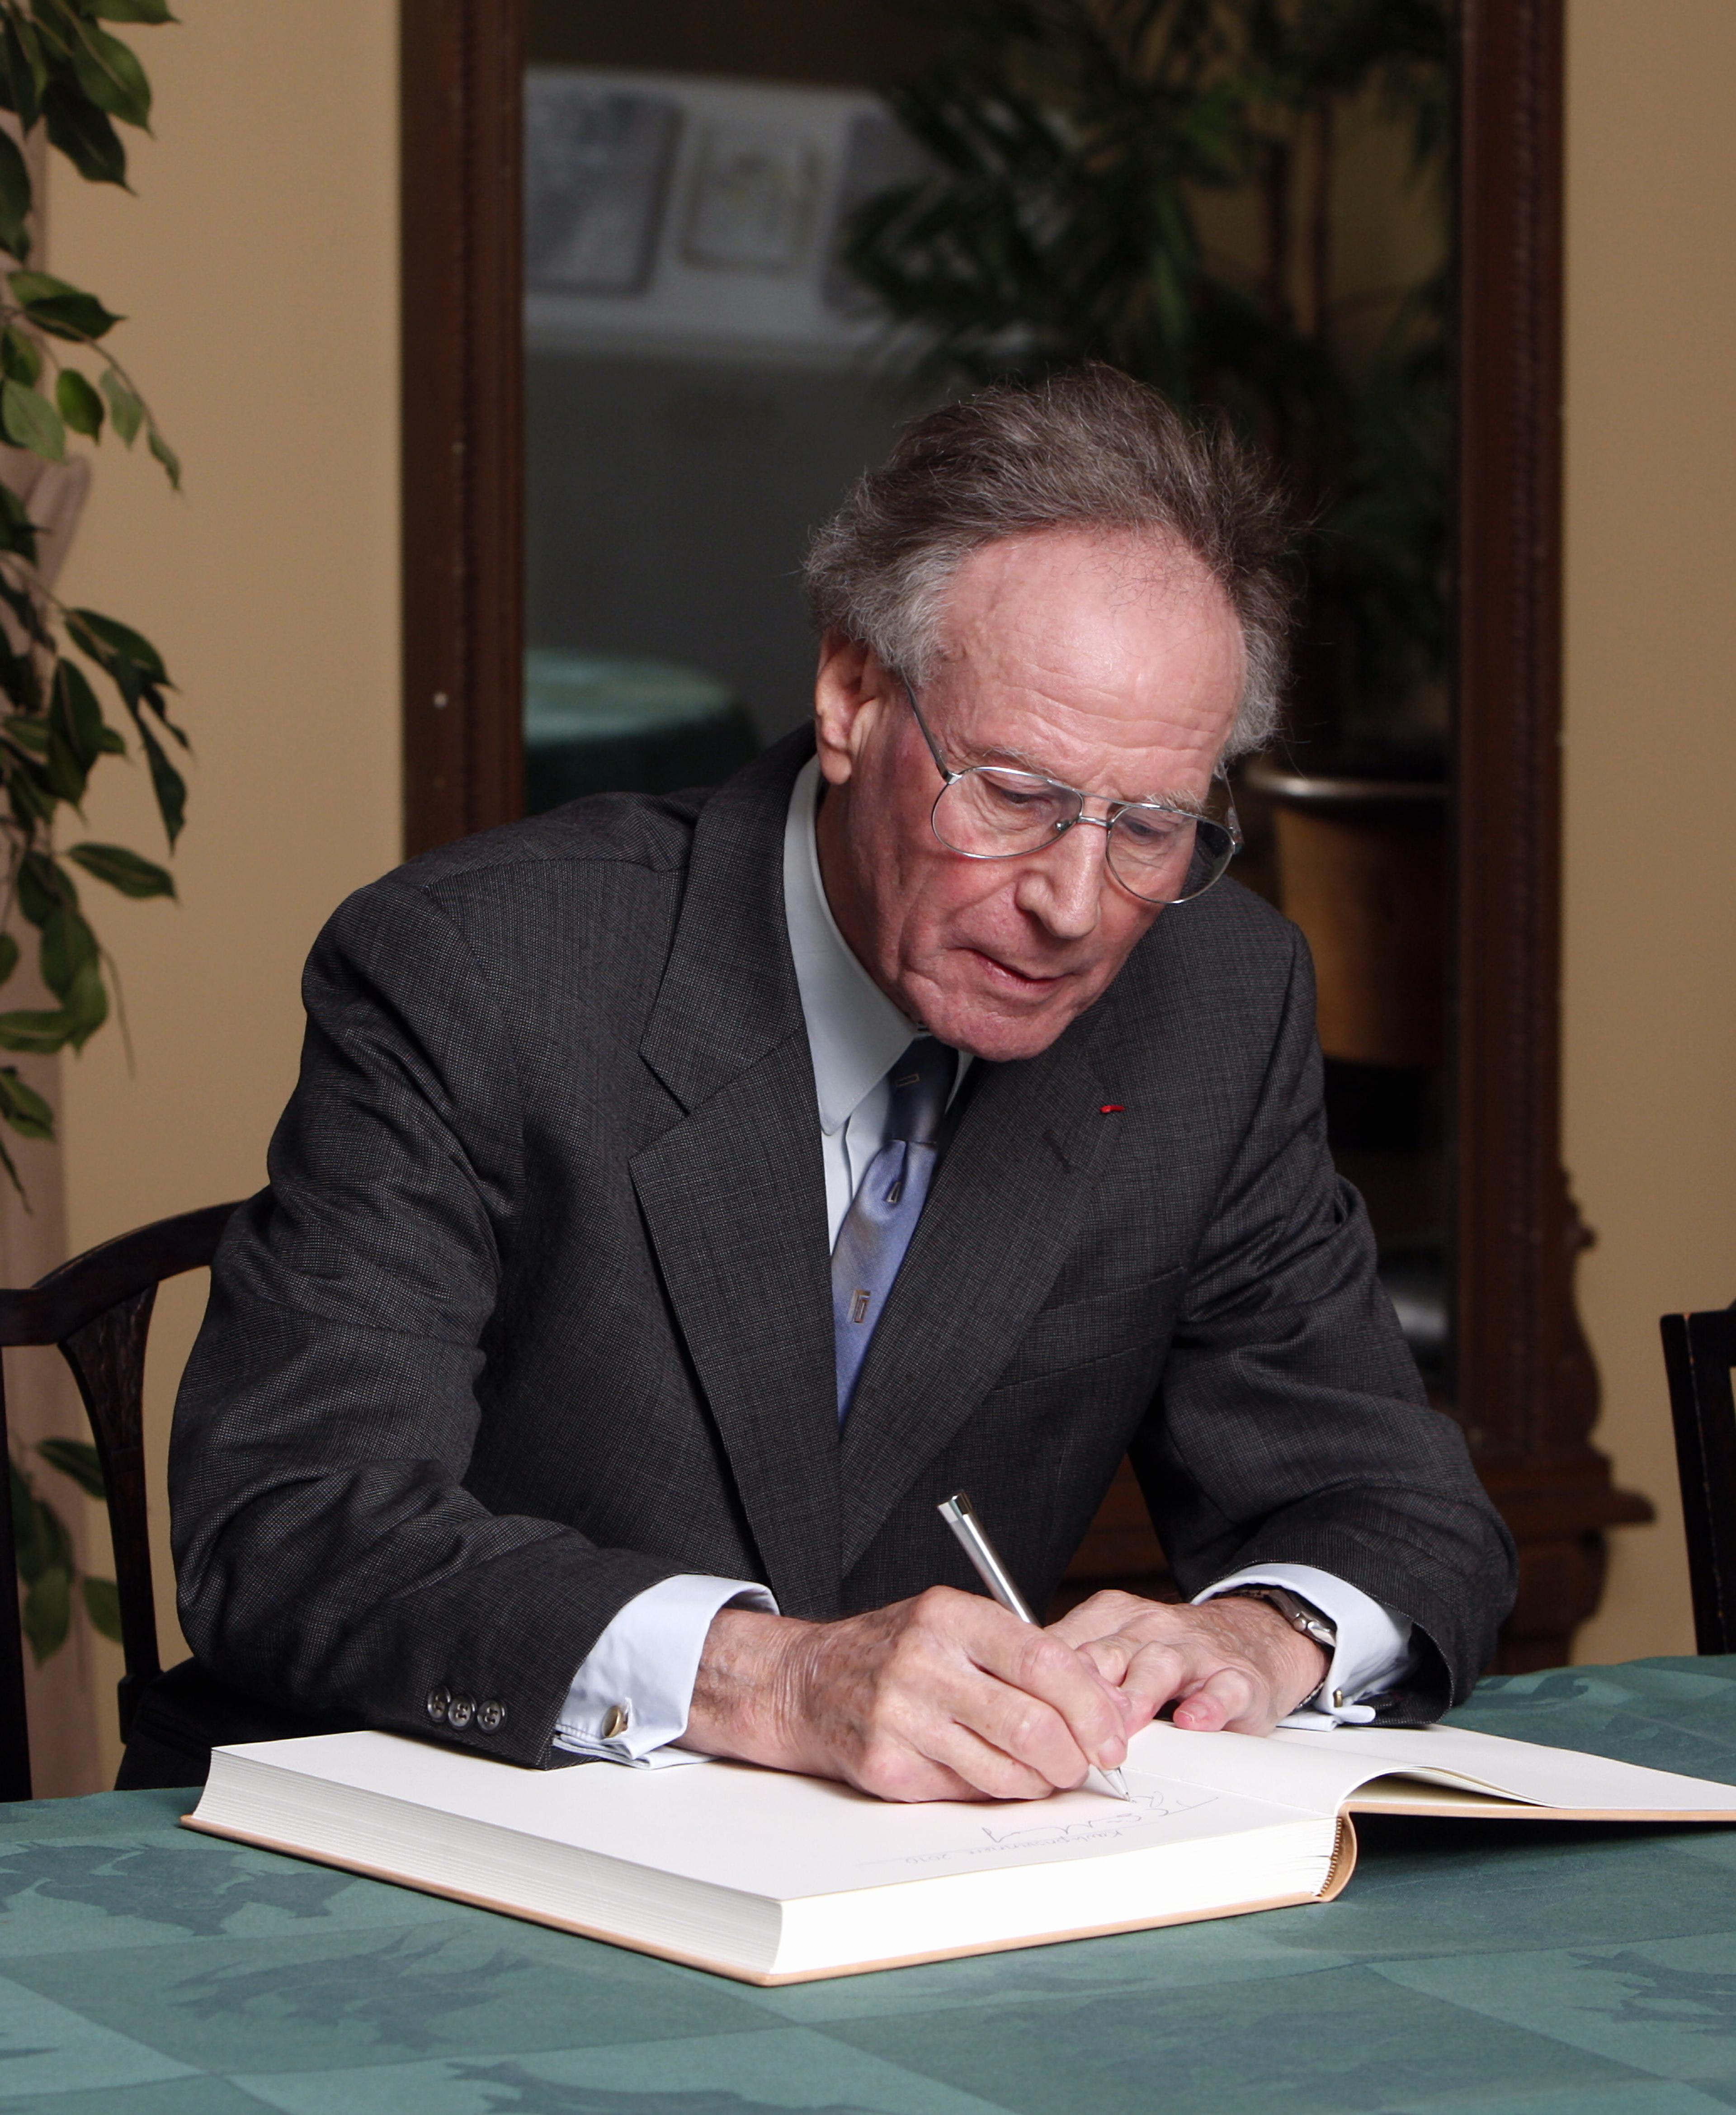 Raymond N. Wilson signing the guest book